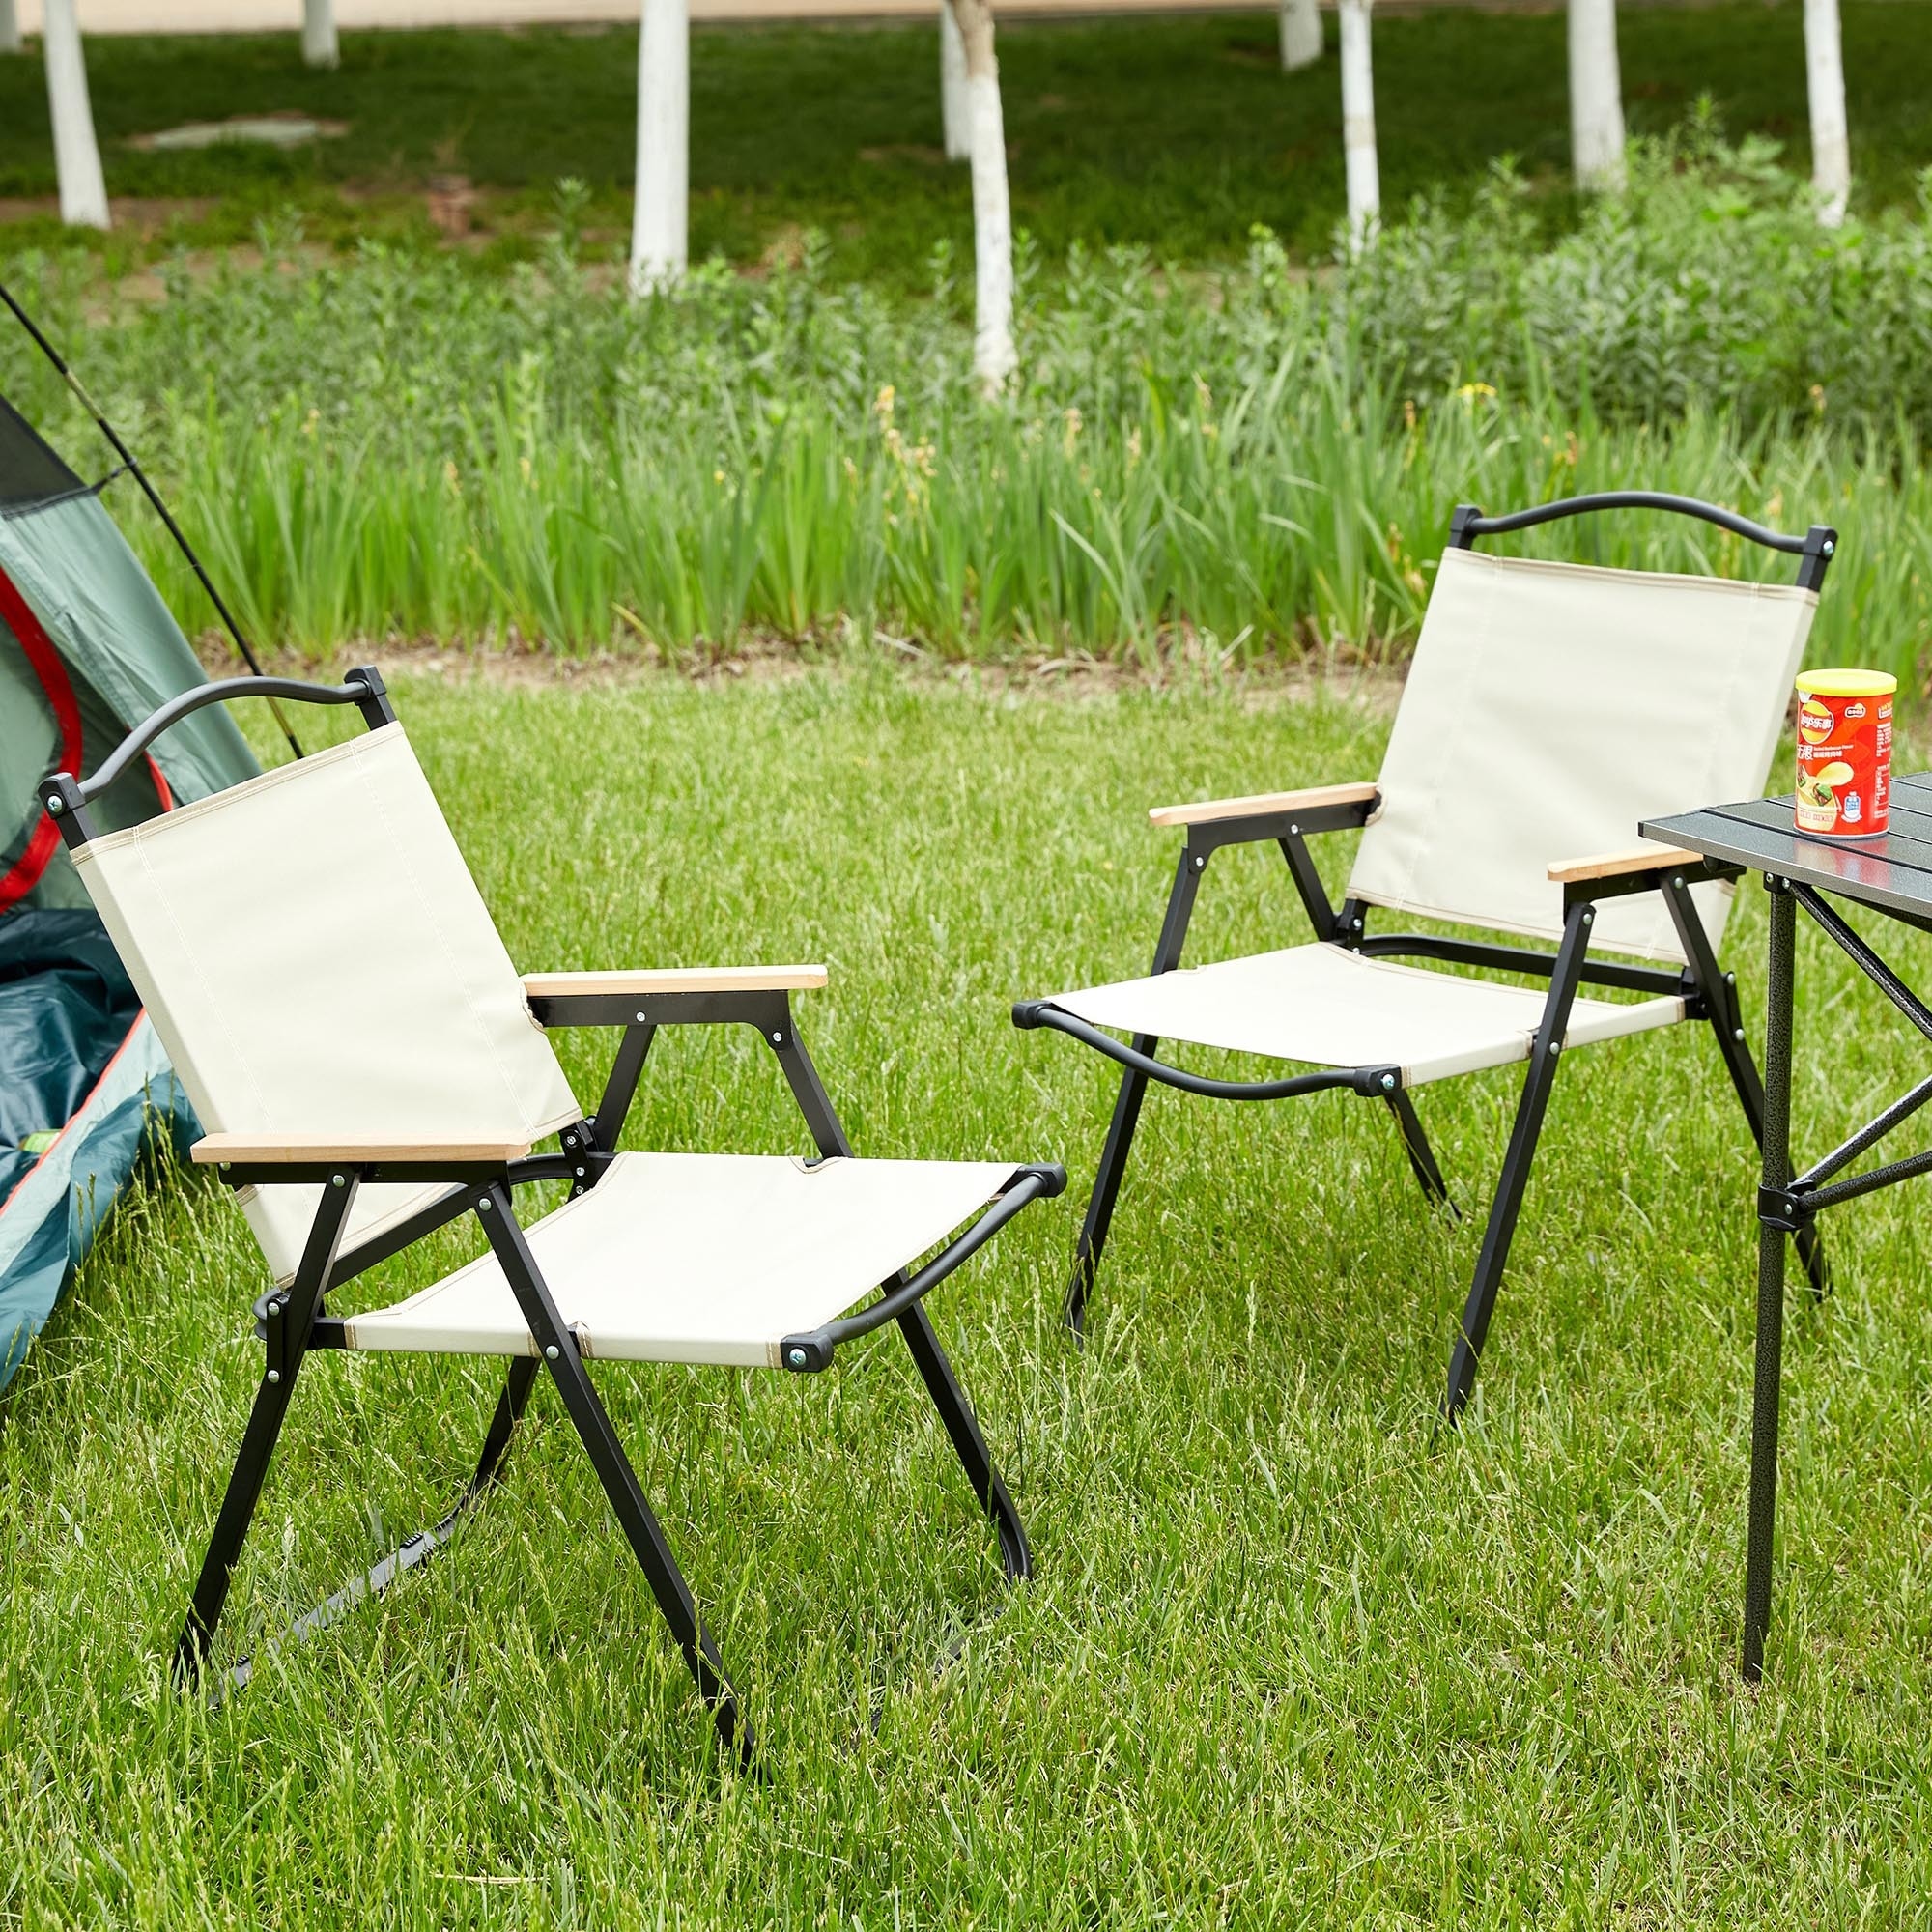 2-piece Outdoor Camping Folding Chair